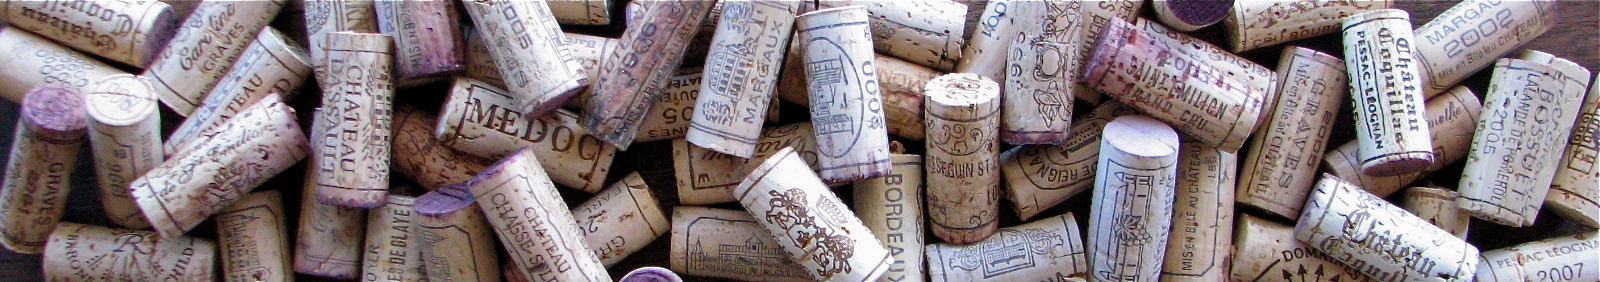 DiscoverVin About us-wine corks